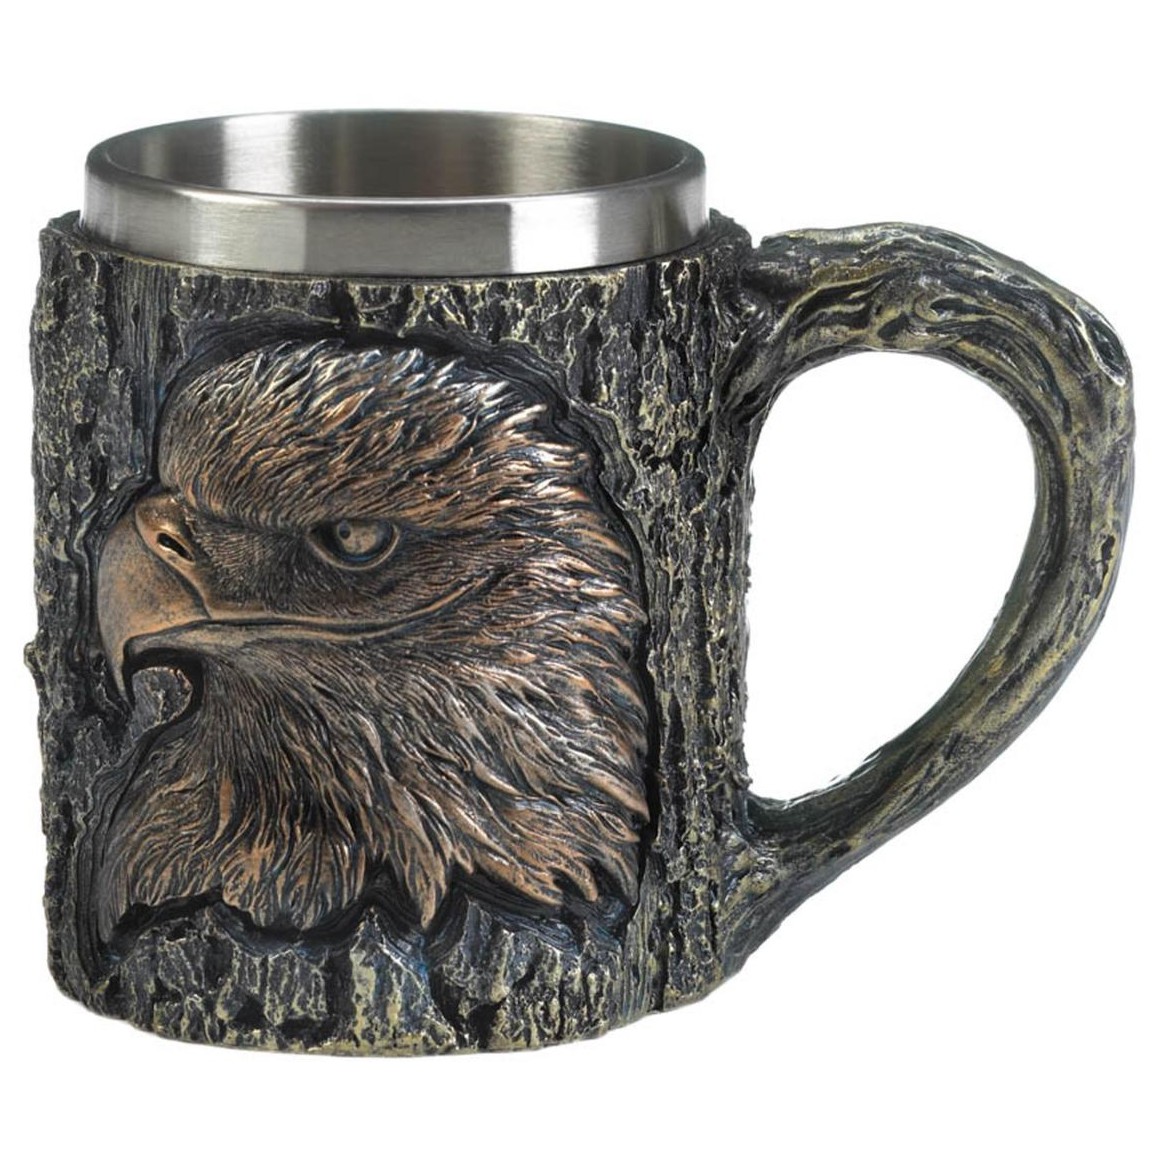 Rustic Carved-Look Eagle MUG with Stainless Steel Insert